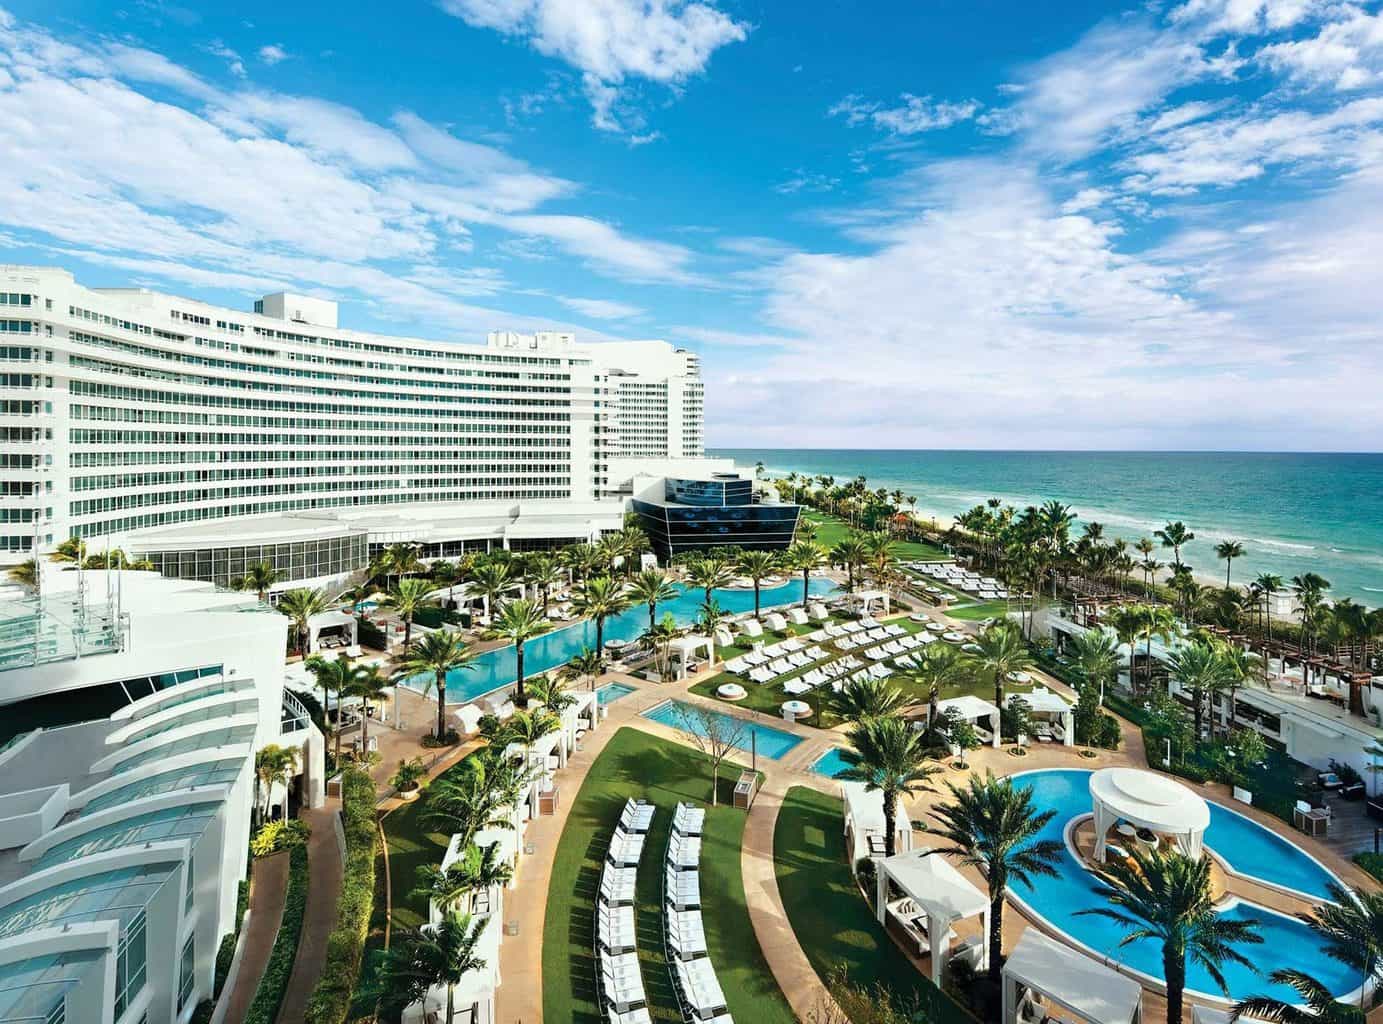 Exterior view of the pool and beach at Fontainebleau Miami Beach in Florida